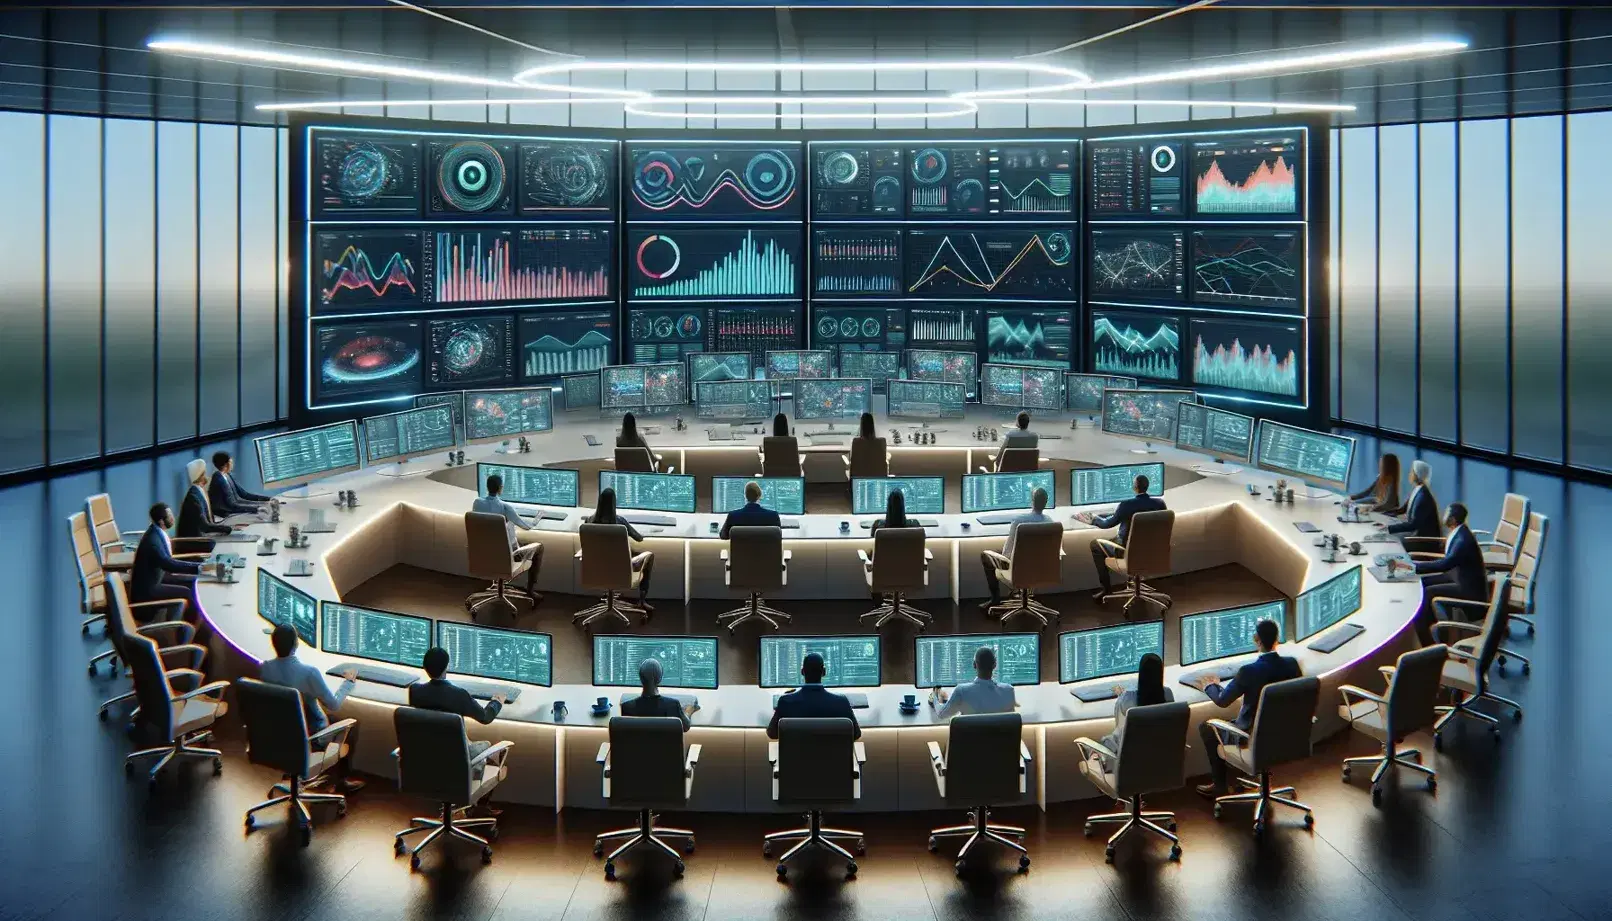 Modern control room with high-resolution monitors displaying colorful graphs, occupied ergonomic chairs, and laptops on a white table, in a well-lit, focused environment.